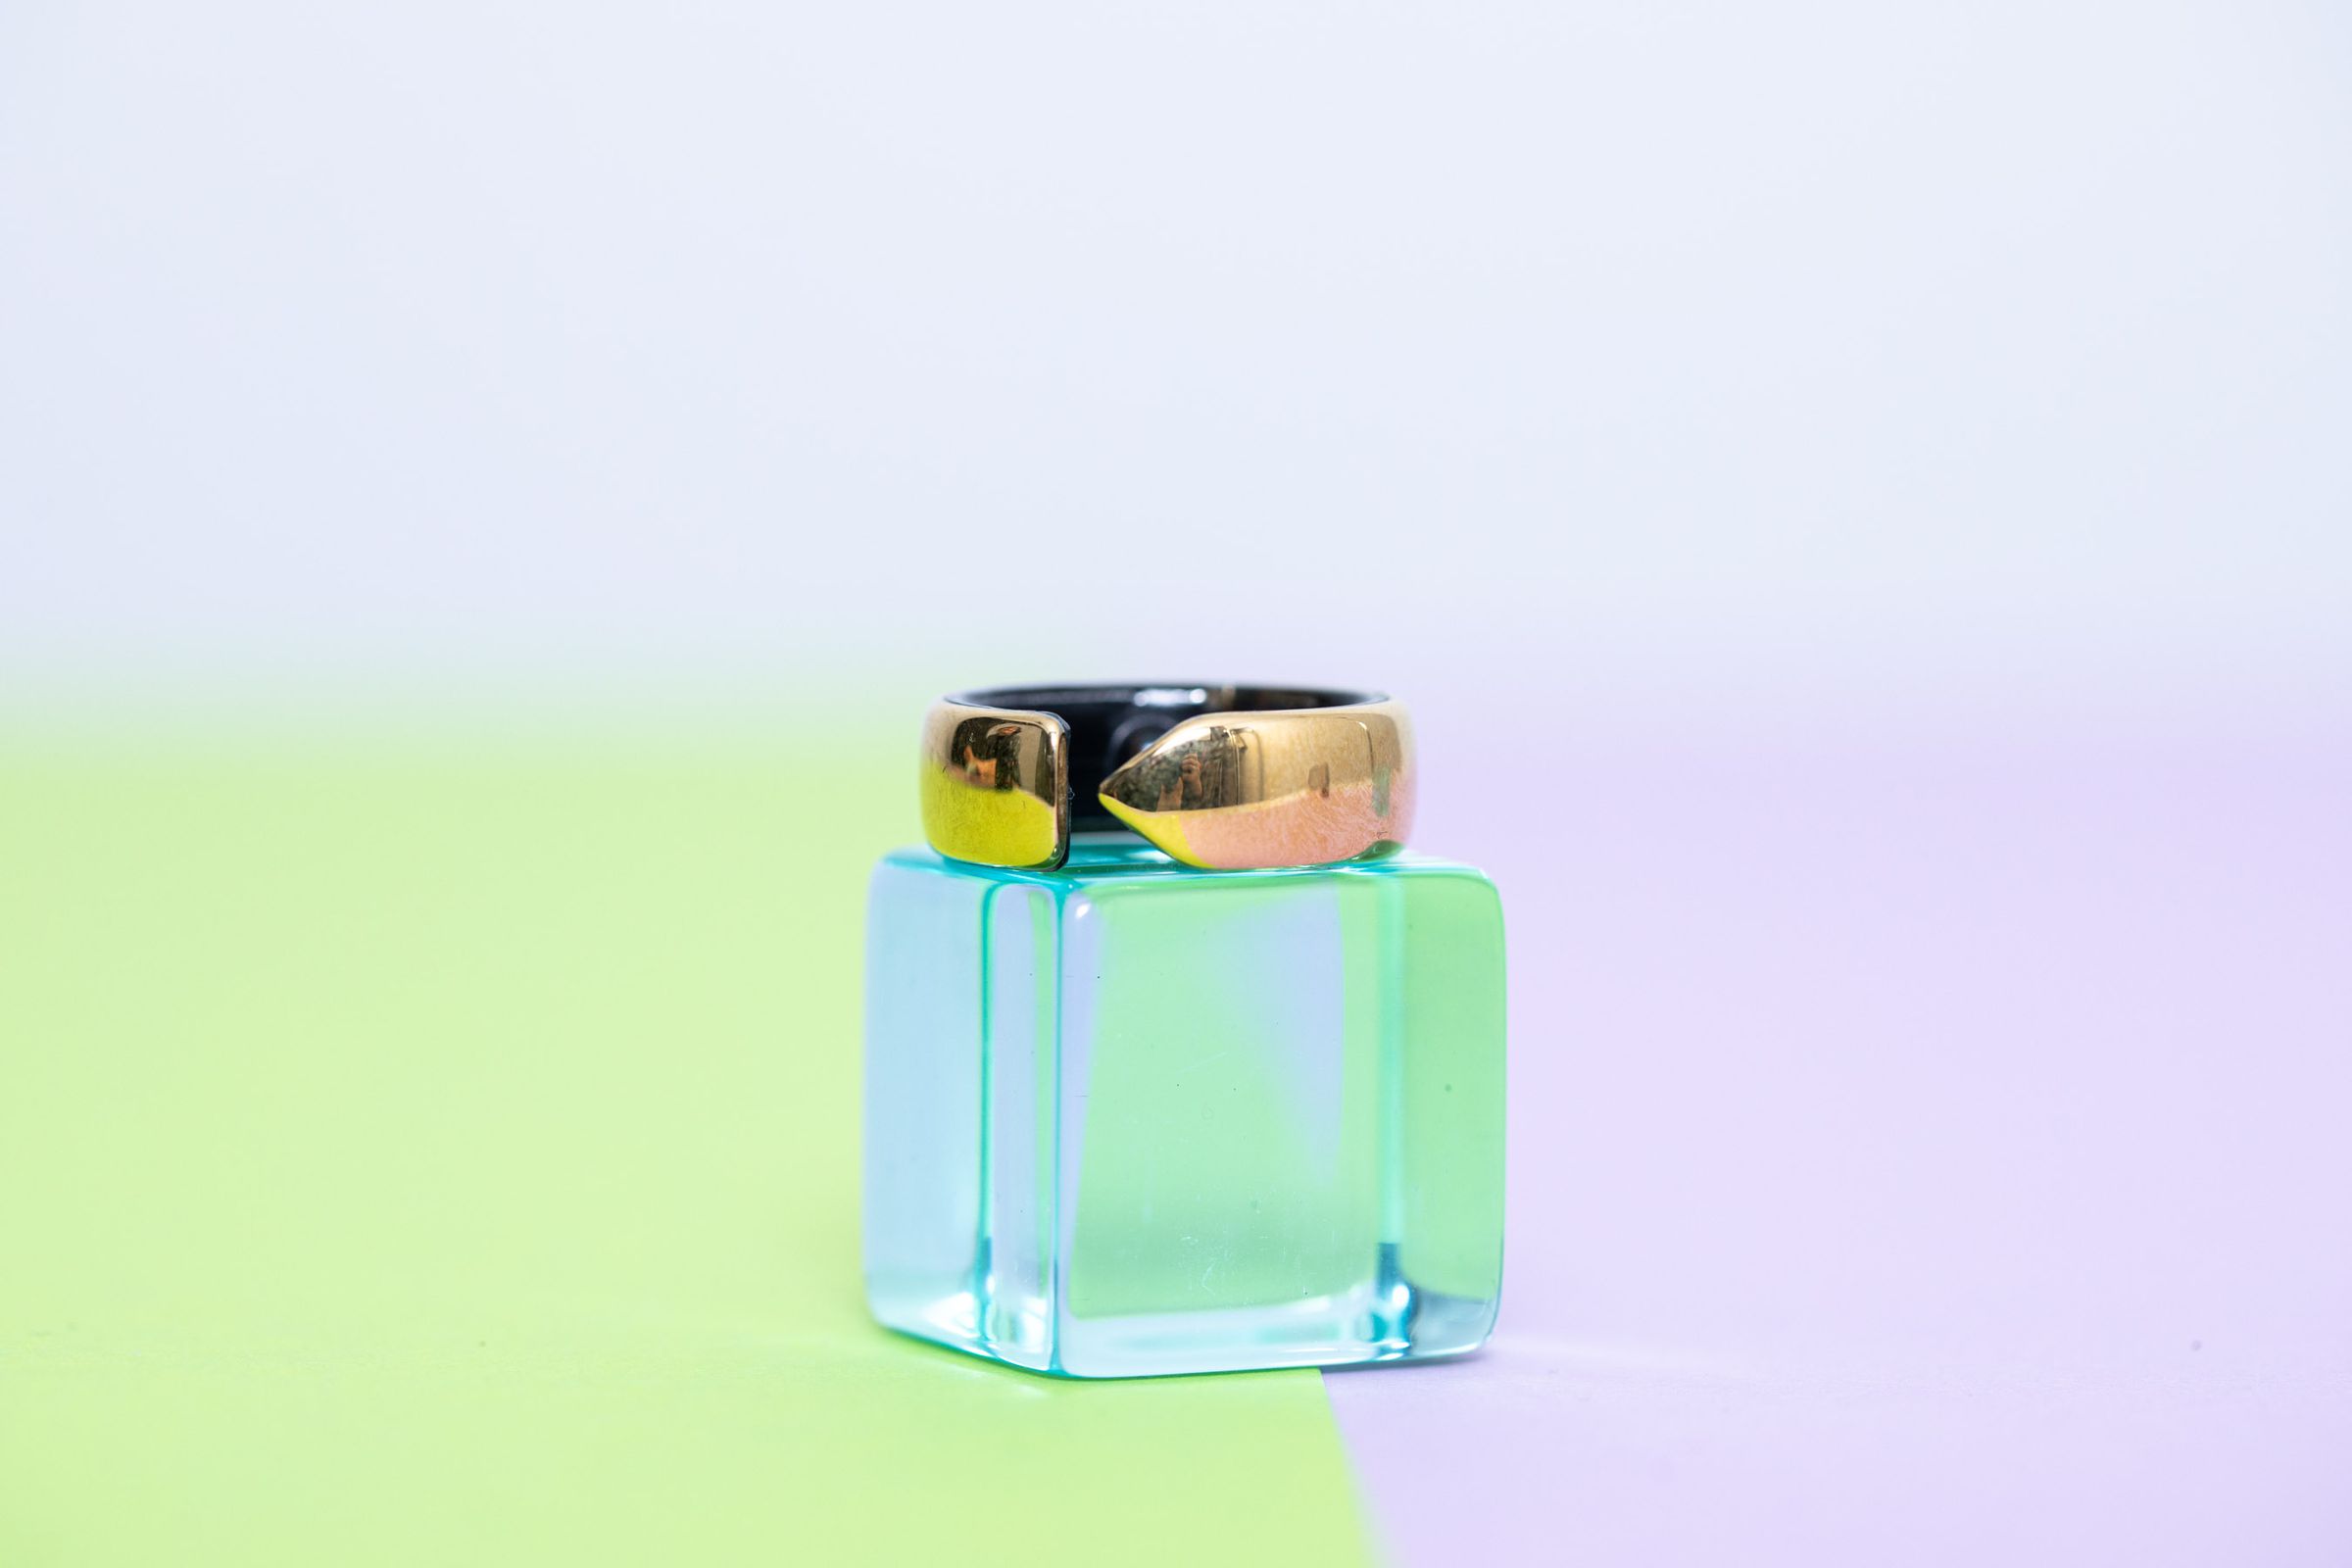 The Evie Ring on top of a clear blue block on top of a pastel green and purple background.